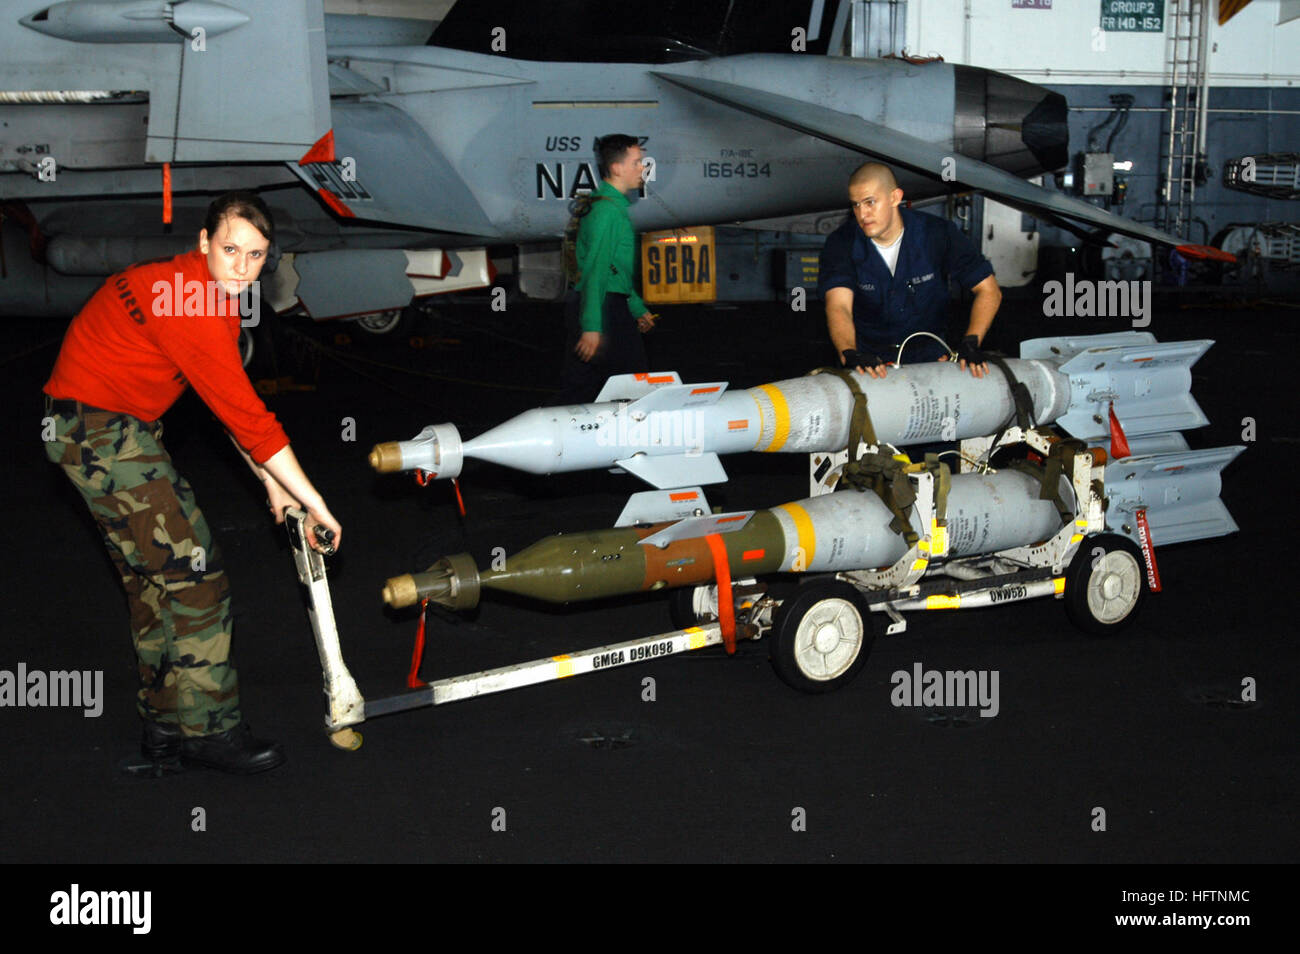 070511-N-1525H-014 INDIAN OCEAN (May 11, 2007) - Aviation Ordnanceman Airman Brittany Hodgson and Aviation Ordnanceman 3rd Class Steve Acosta moves laser guided bombs in the hangar bay aboard the nuclear-powered aircraft carrier USS Nimitz (CVN 68). The Nimitz Carrier Strike Group and embarked Carrier Air Wing (CVW) 11 are deployed in the U.S. 5th Fleet, conducting Maritime Security Operations and supporting troops participating in Operation Enduring Freedom. U.S. Navy photo by Mass Communication Specialist Seaman Matthew Haws (RELEASED) US Navy 070511-N-1525H-014 Aviation Ordnanceman Airman B Stock Photo